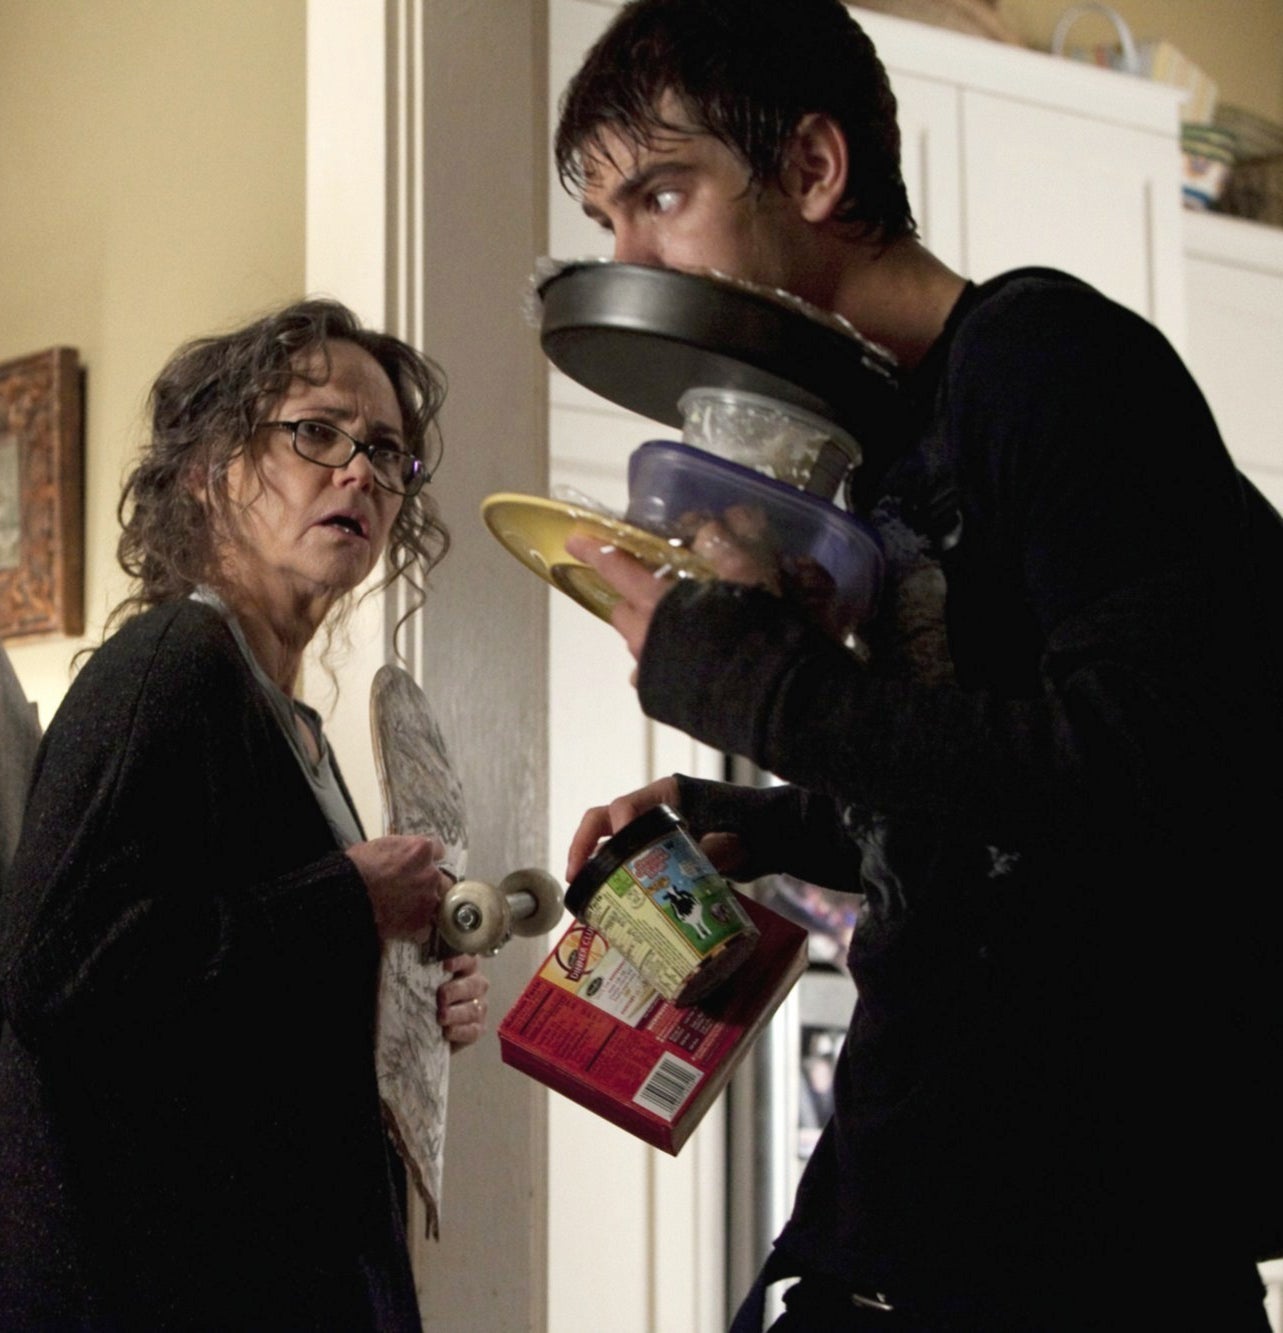 May watches in disgust as Peter carries an armload of snacks to his room